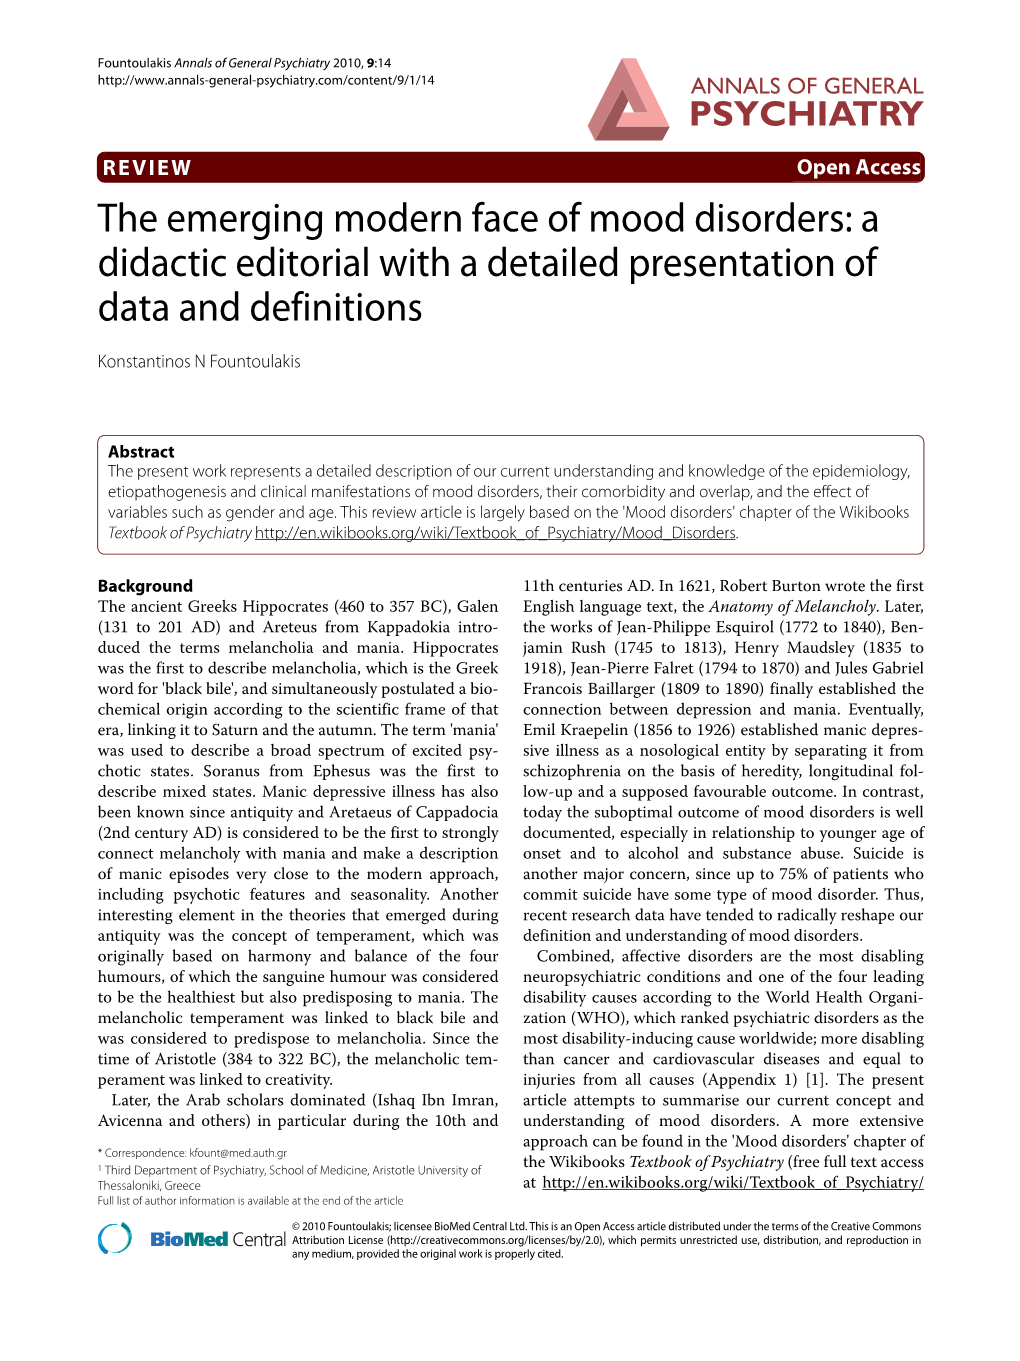 The Emerging Modern Face of Mood Disorders